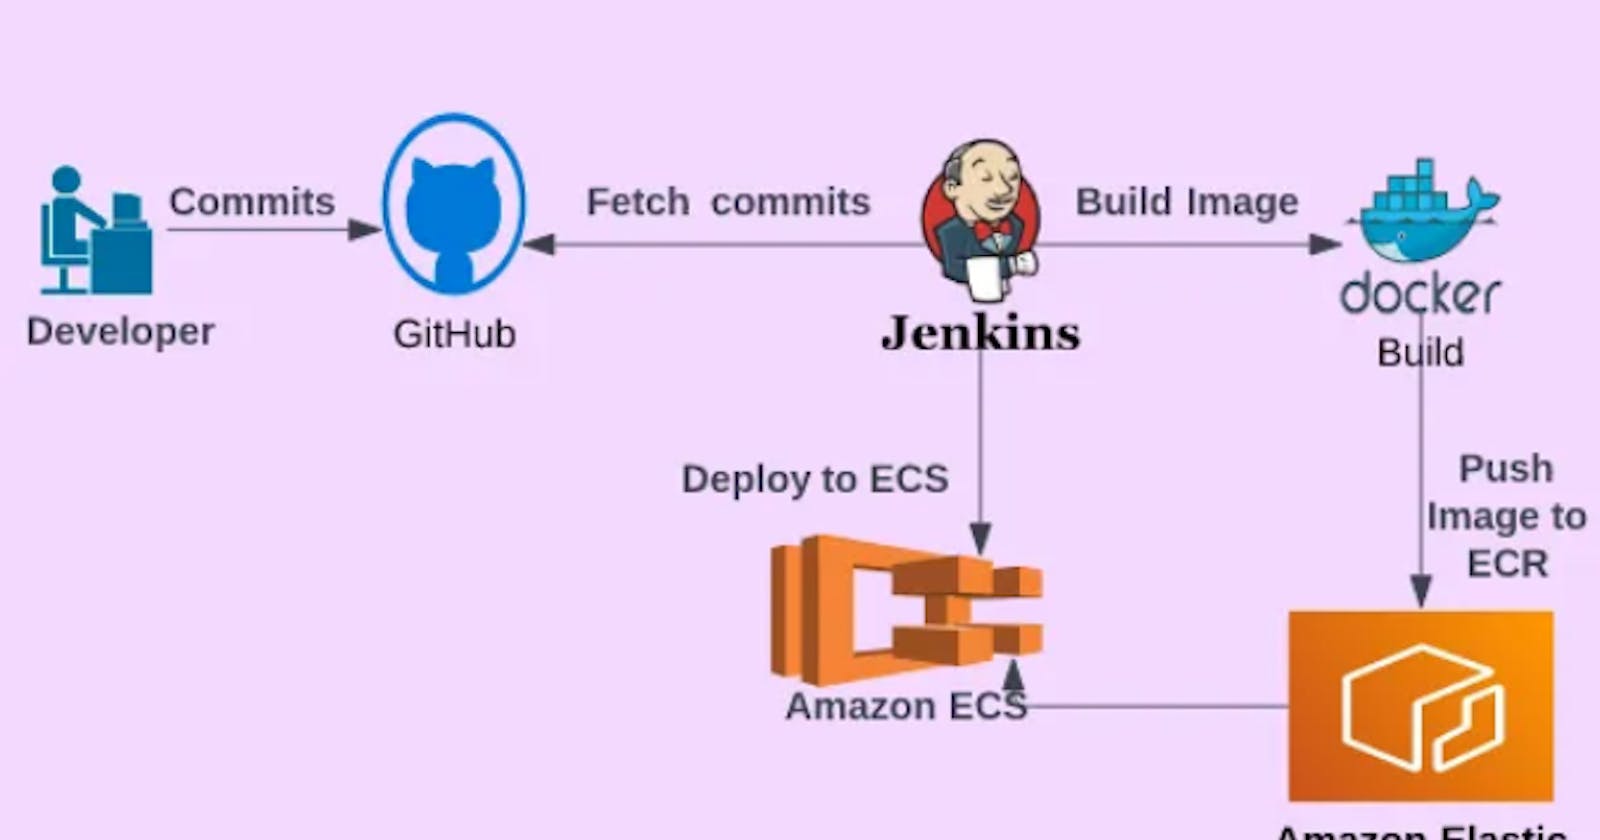 Creating a CI/CD Jenkins Pipeline that runs automatically the Production Stage via Amazon ECS- Fargate, and Amazon ECR.